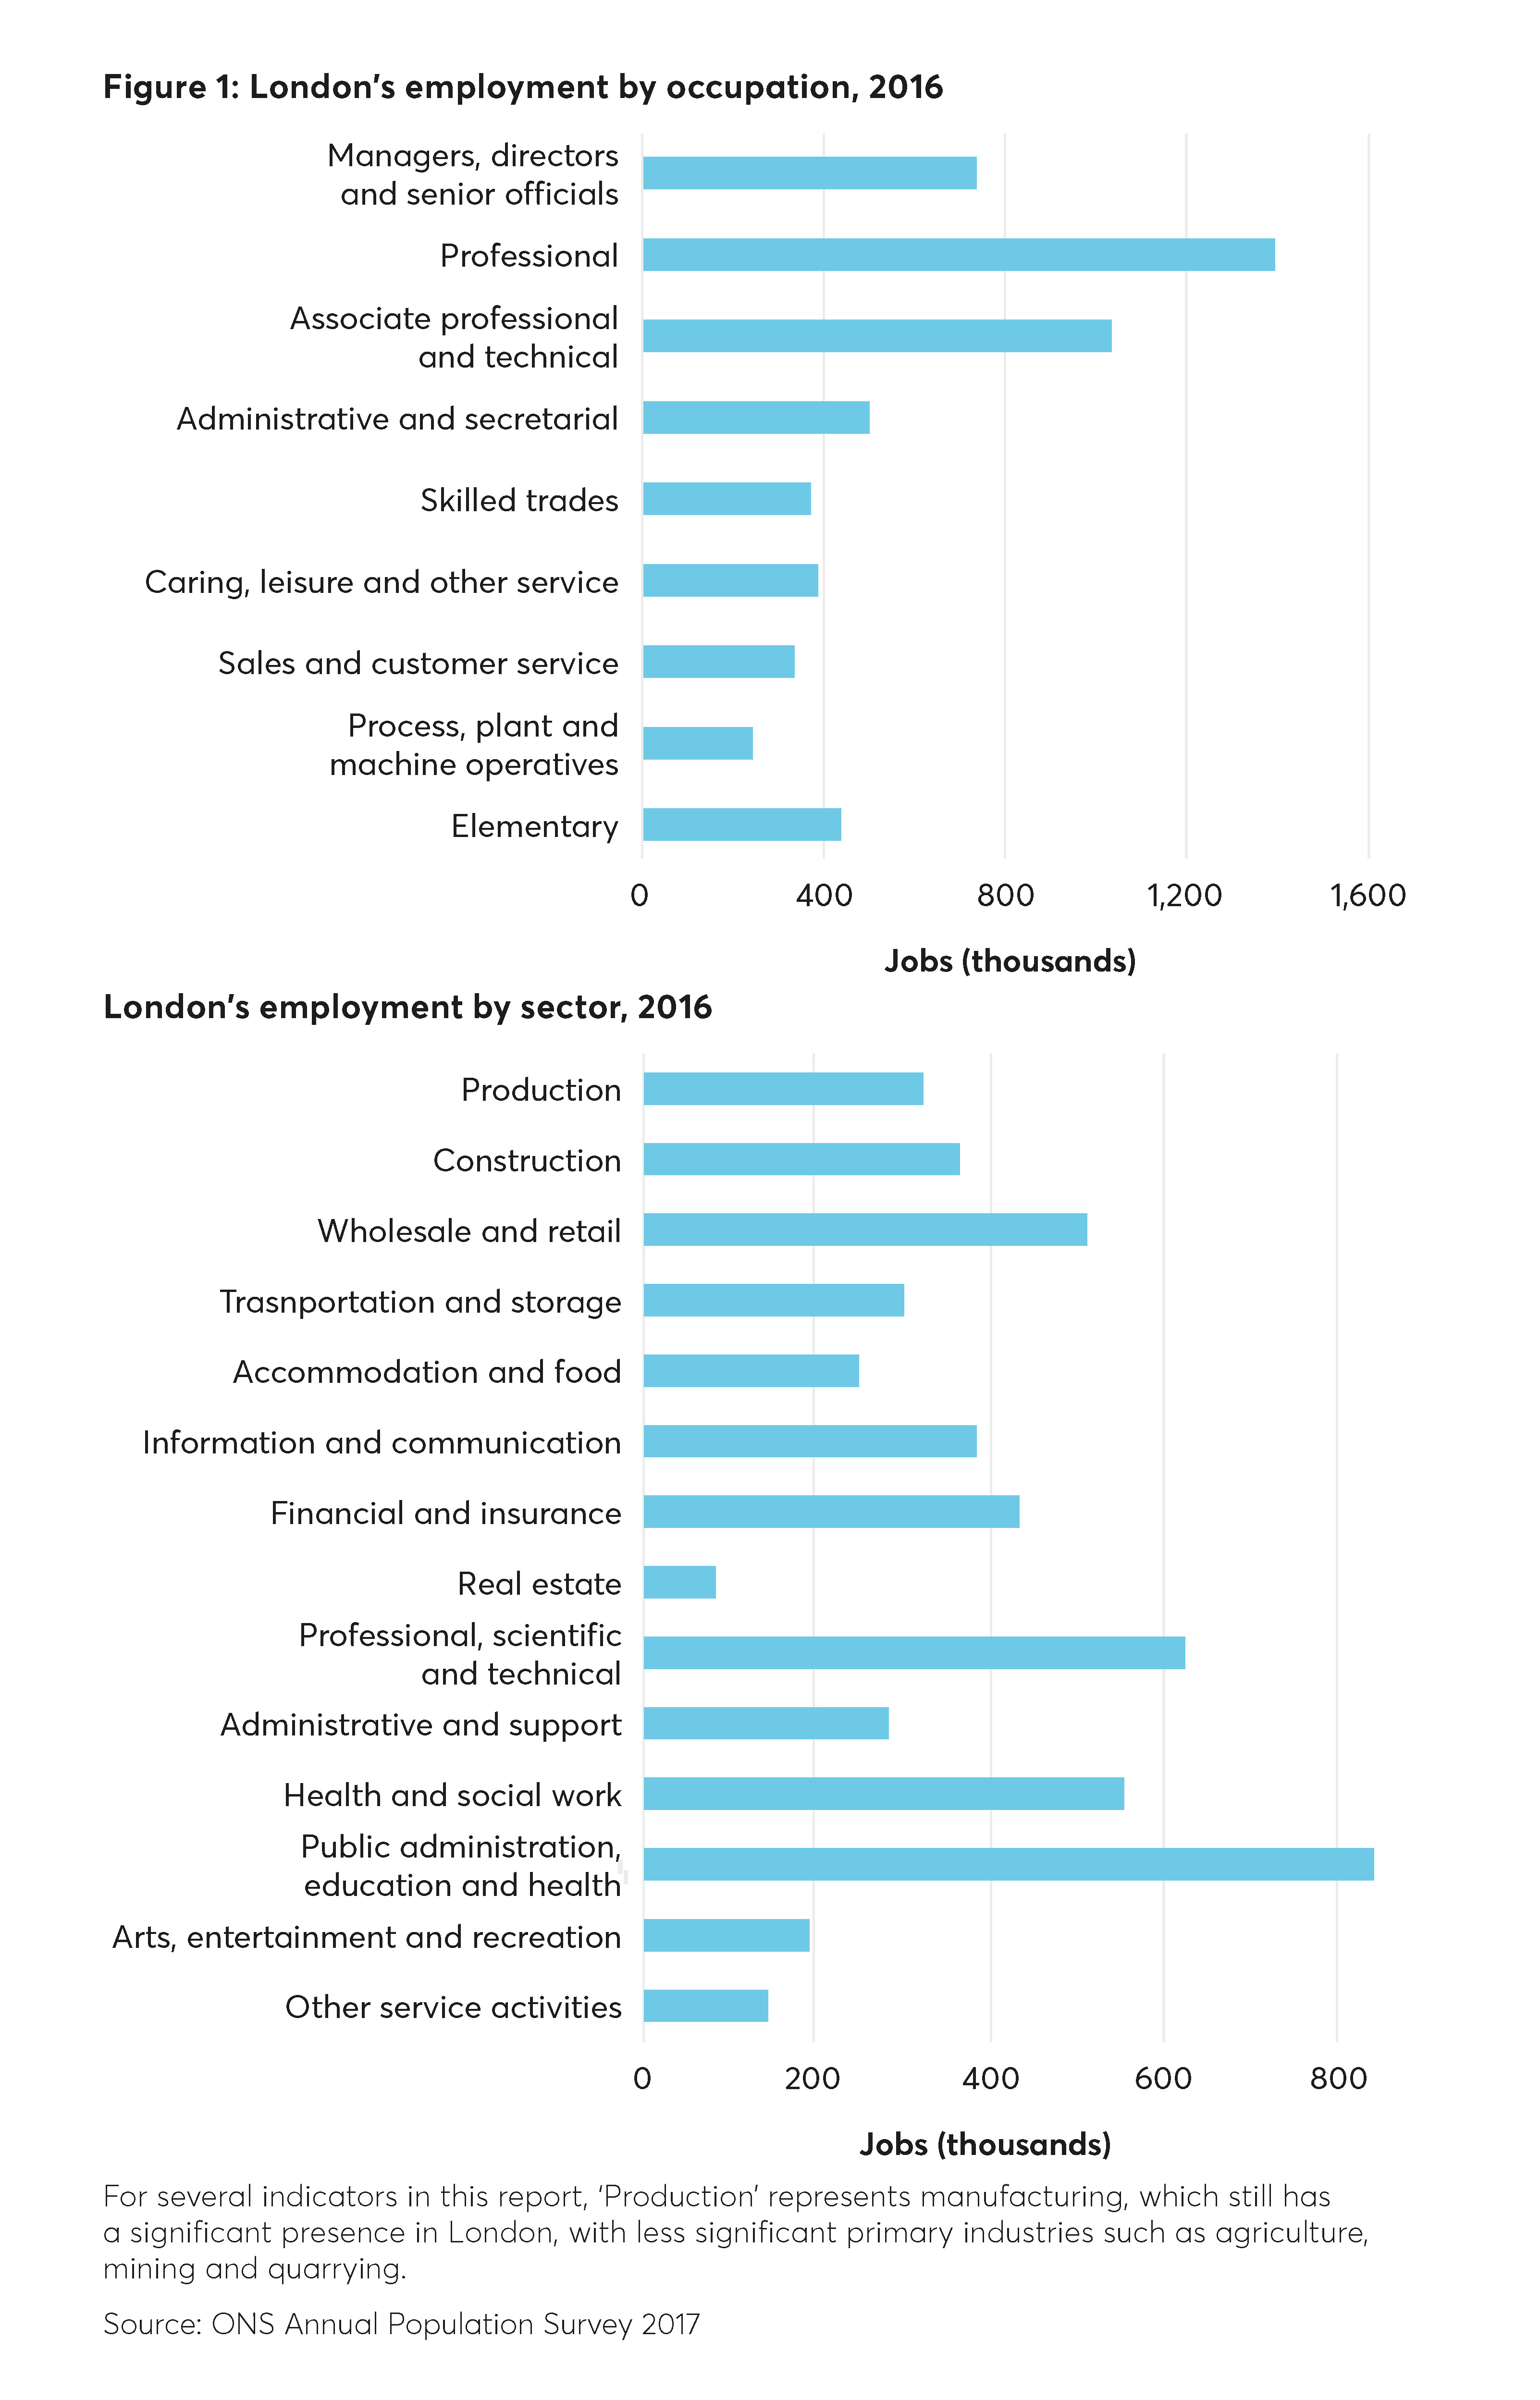 London's employment by occupation and sector